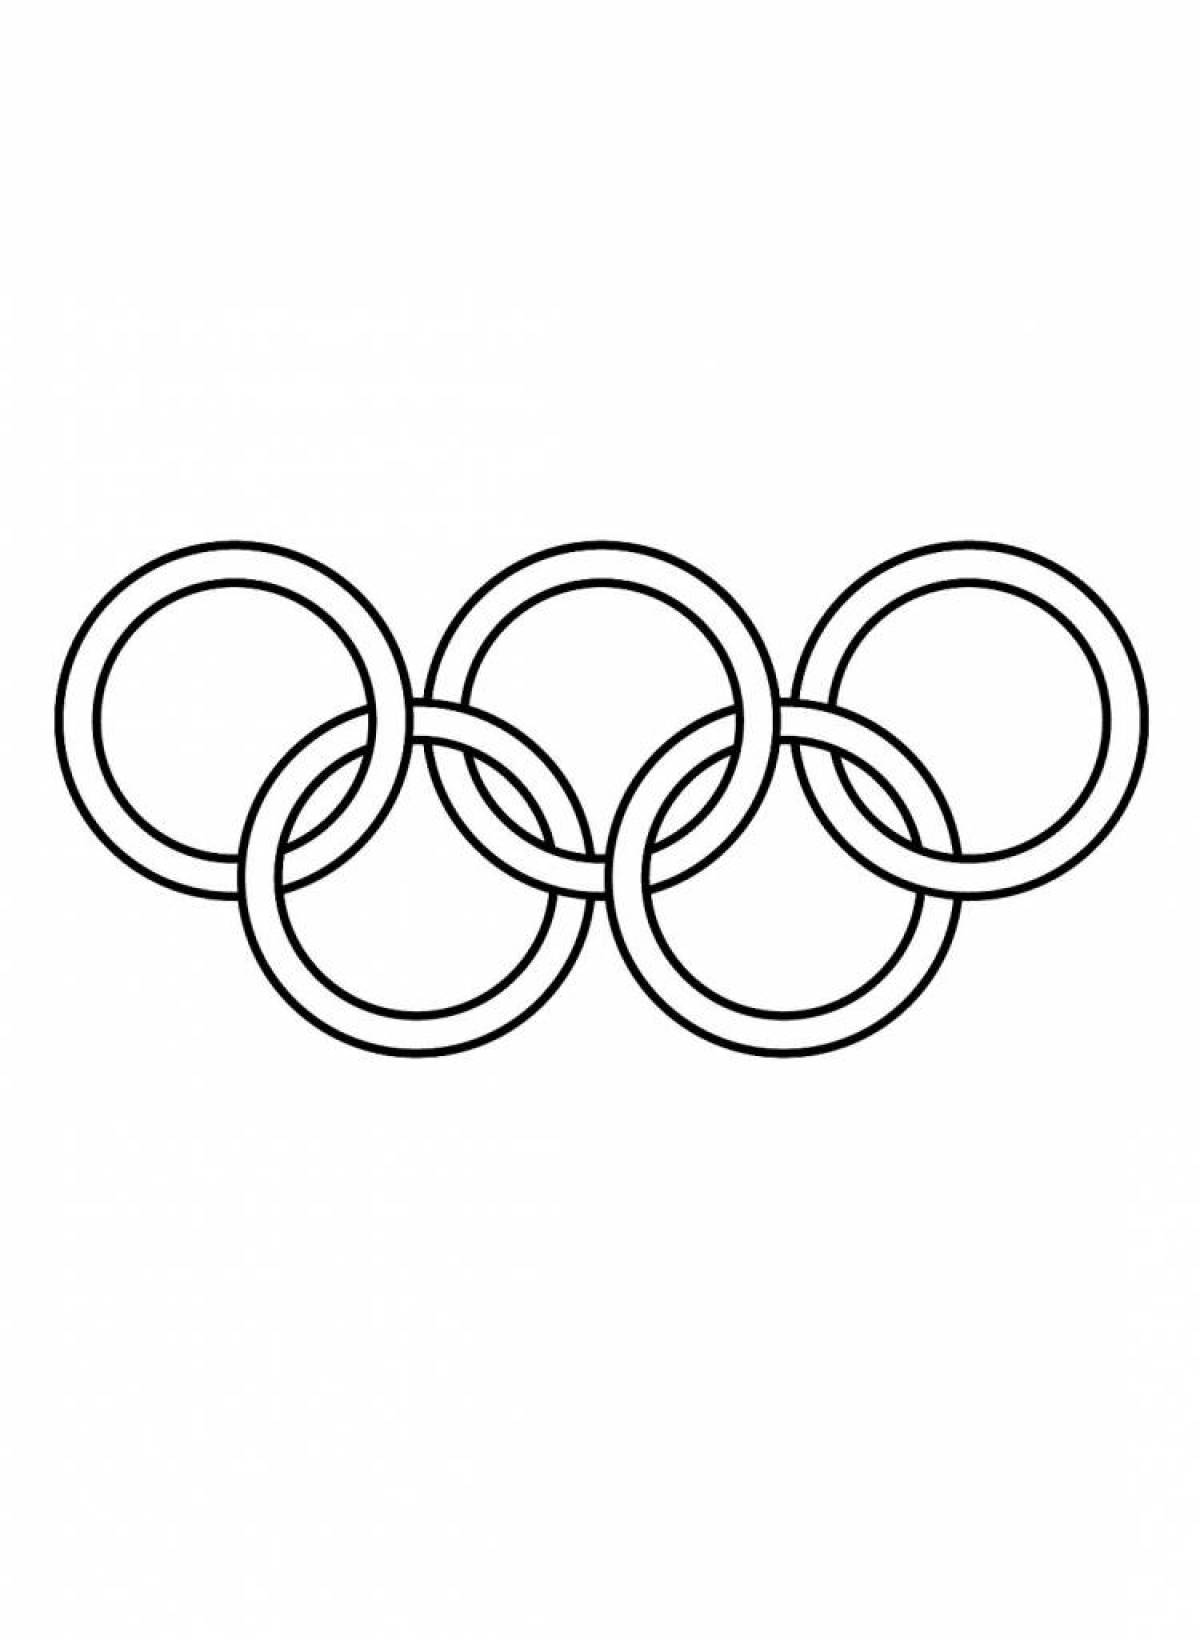 Fine Olympic rings coloring book